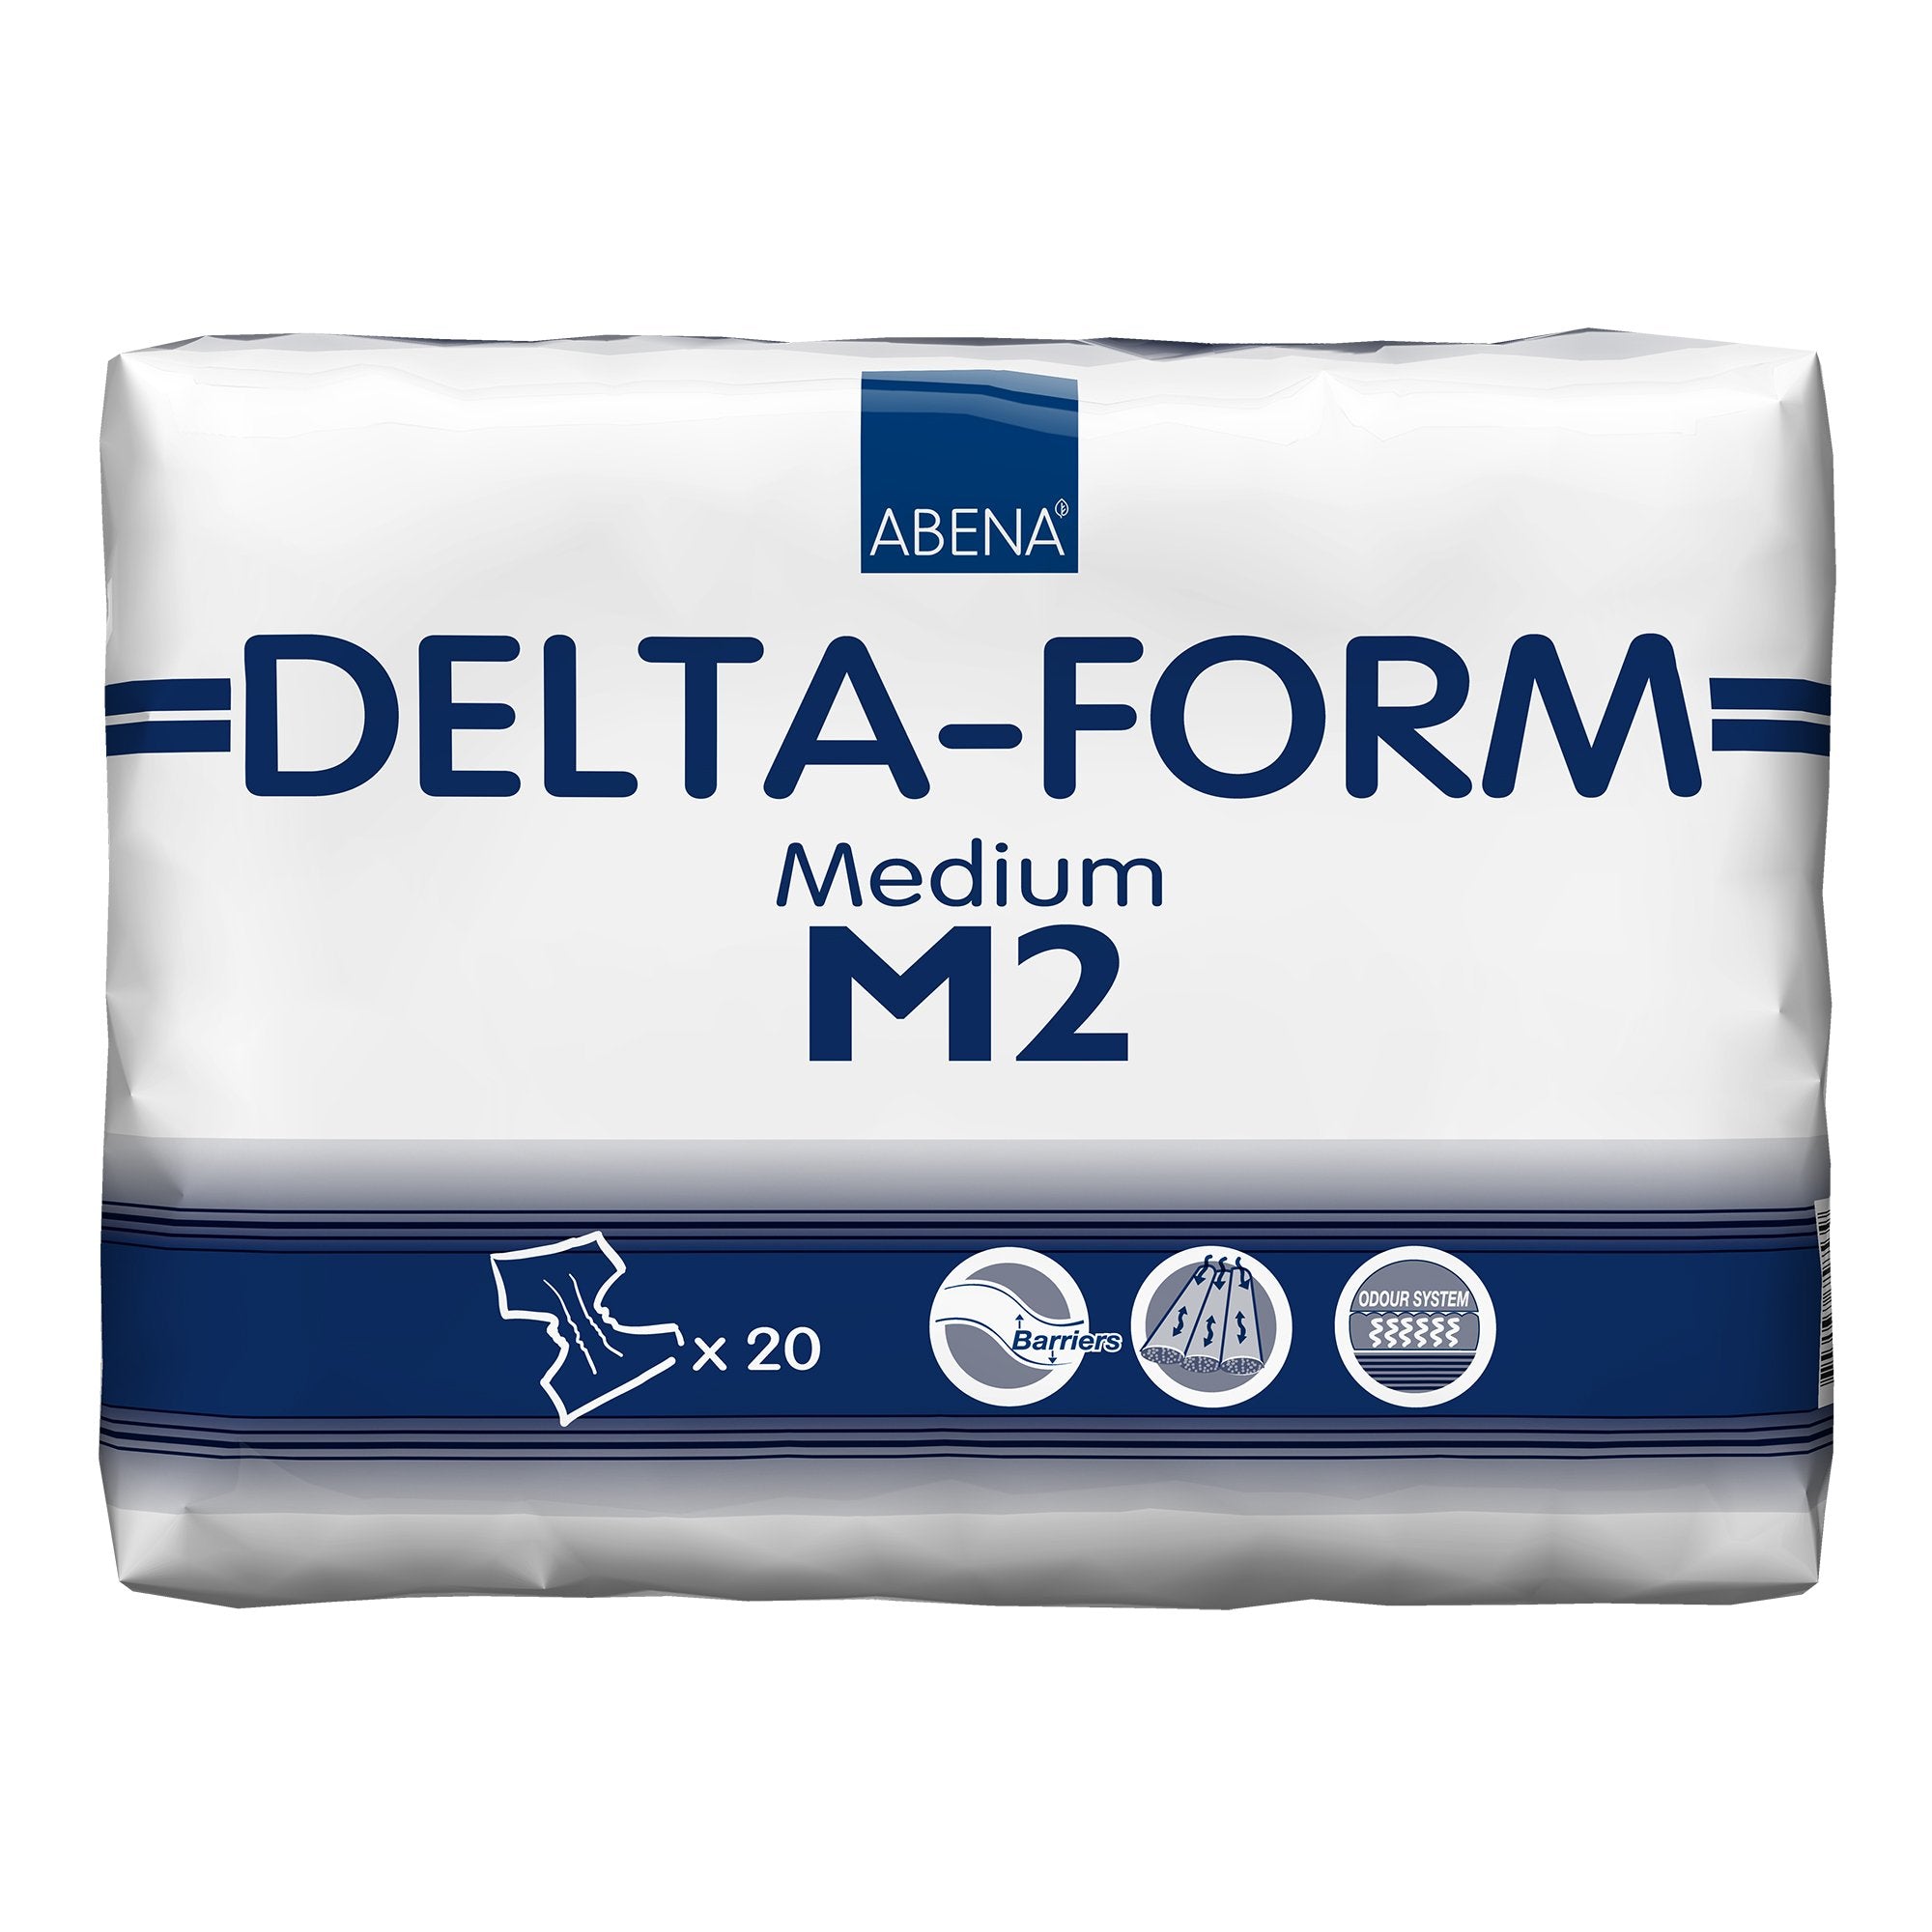 Unisex Adult Incontinence Brief Abena® Delta-Form Medium Disposable Moderate Absorbency